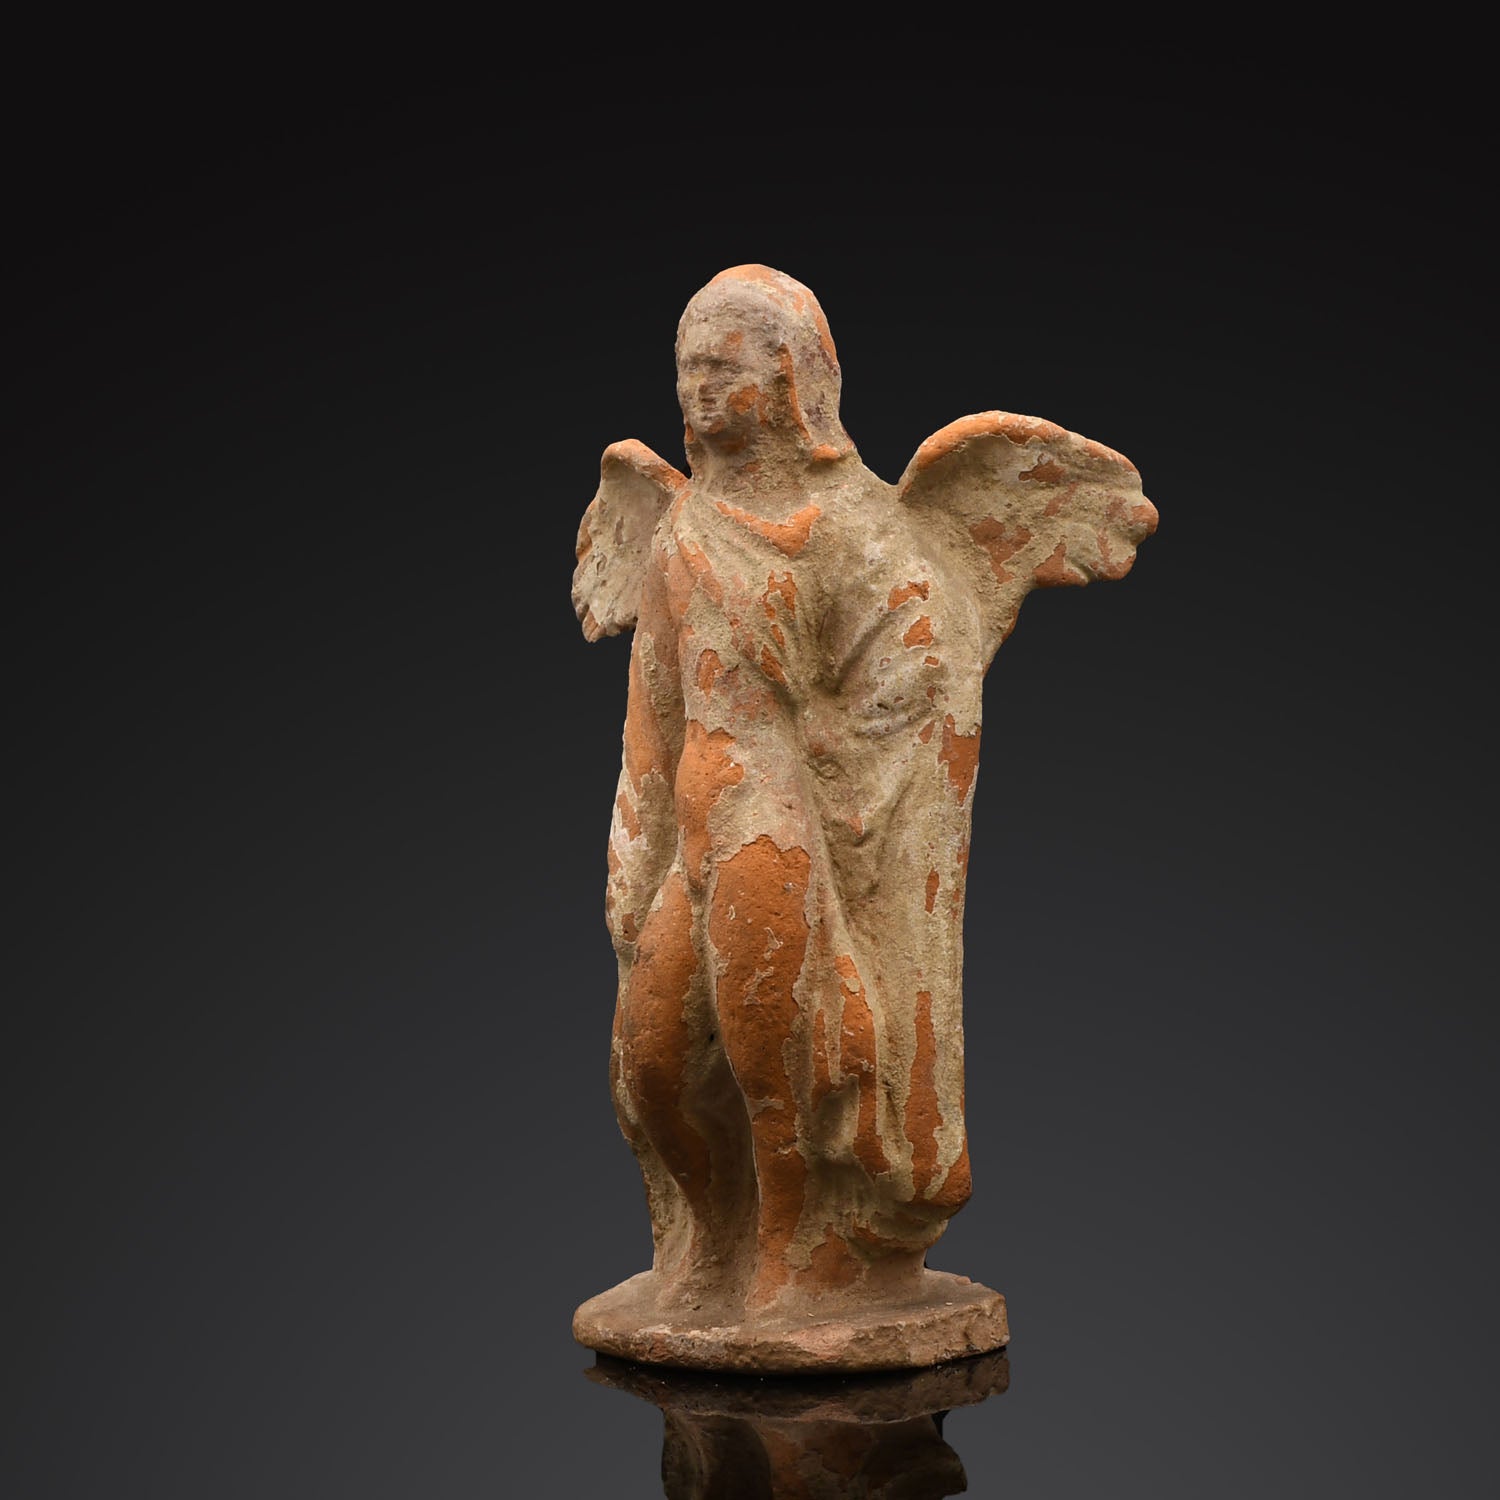 Terracotta Glazed Statuette from 241 Canal Street – Museum of